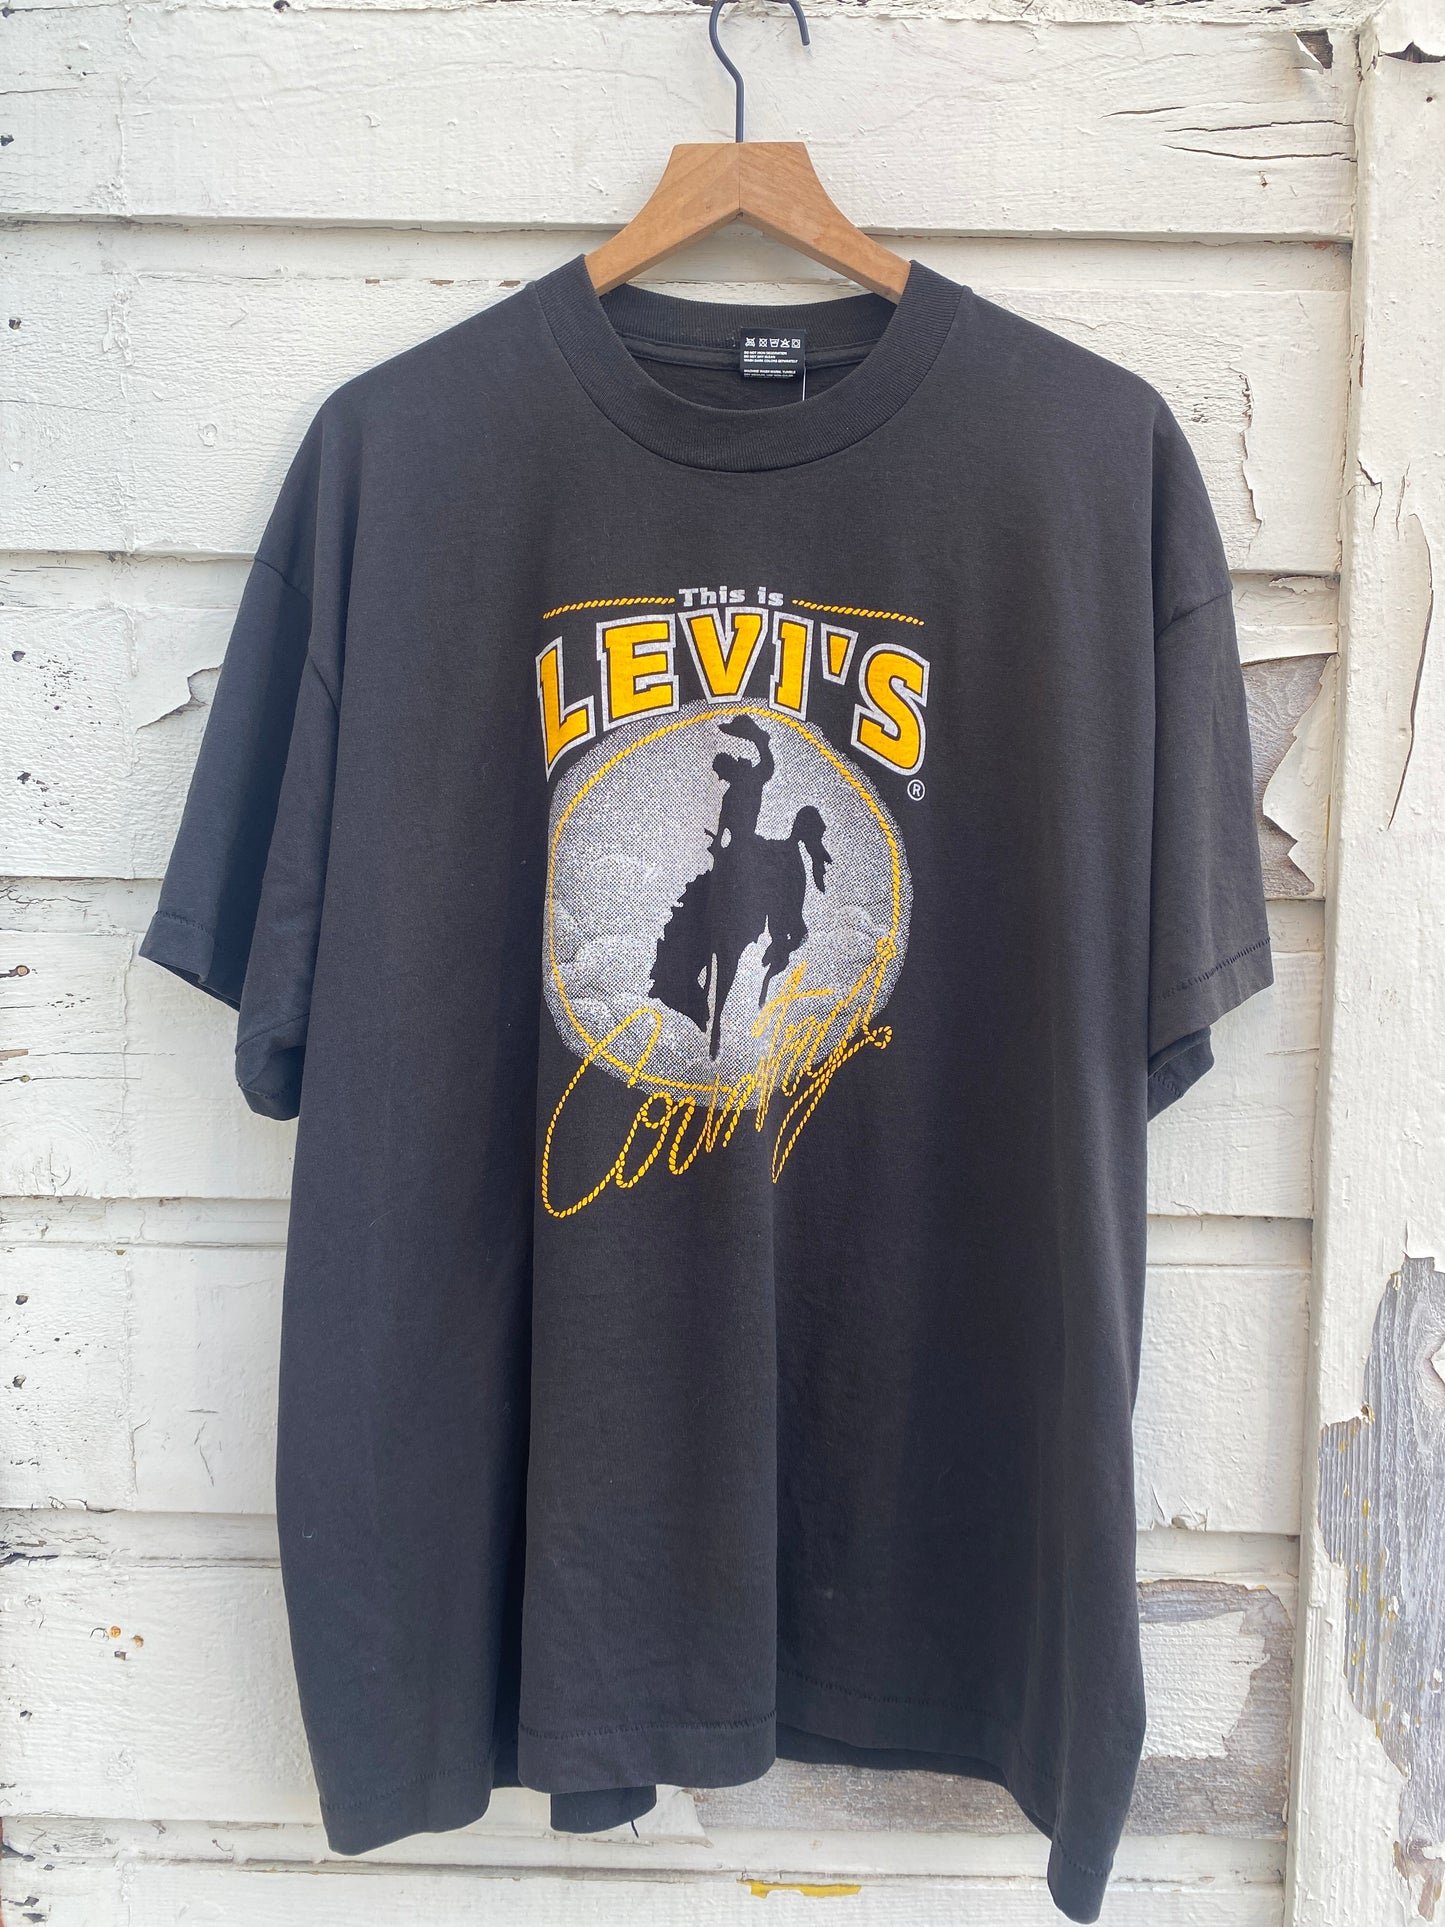 Vintage This Is Levis Country Tshirt XL